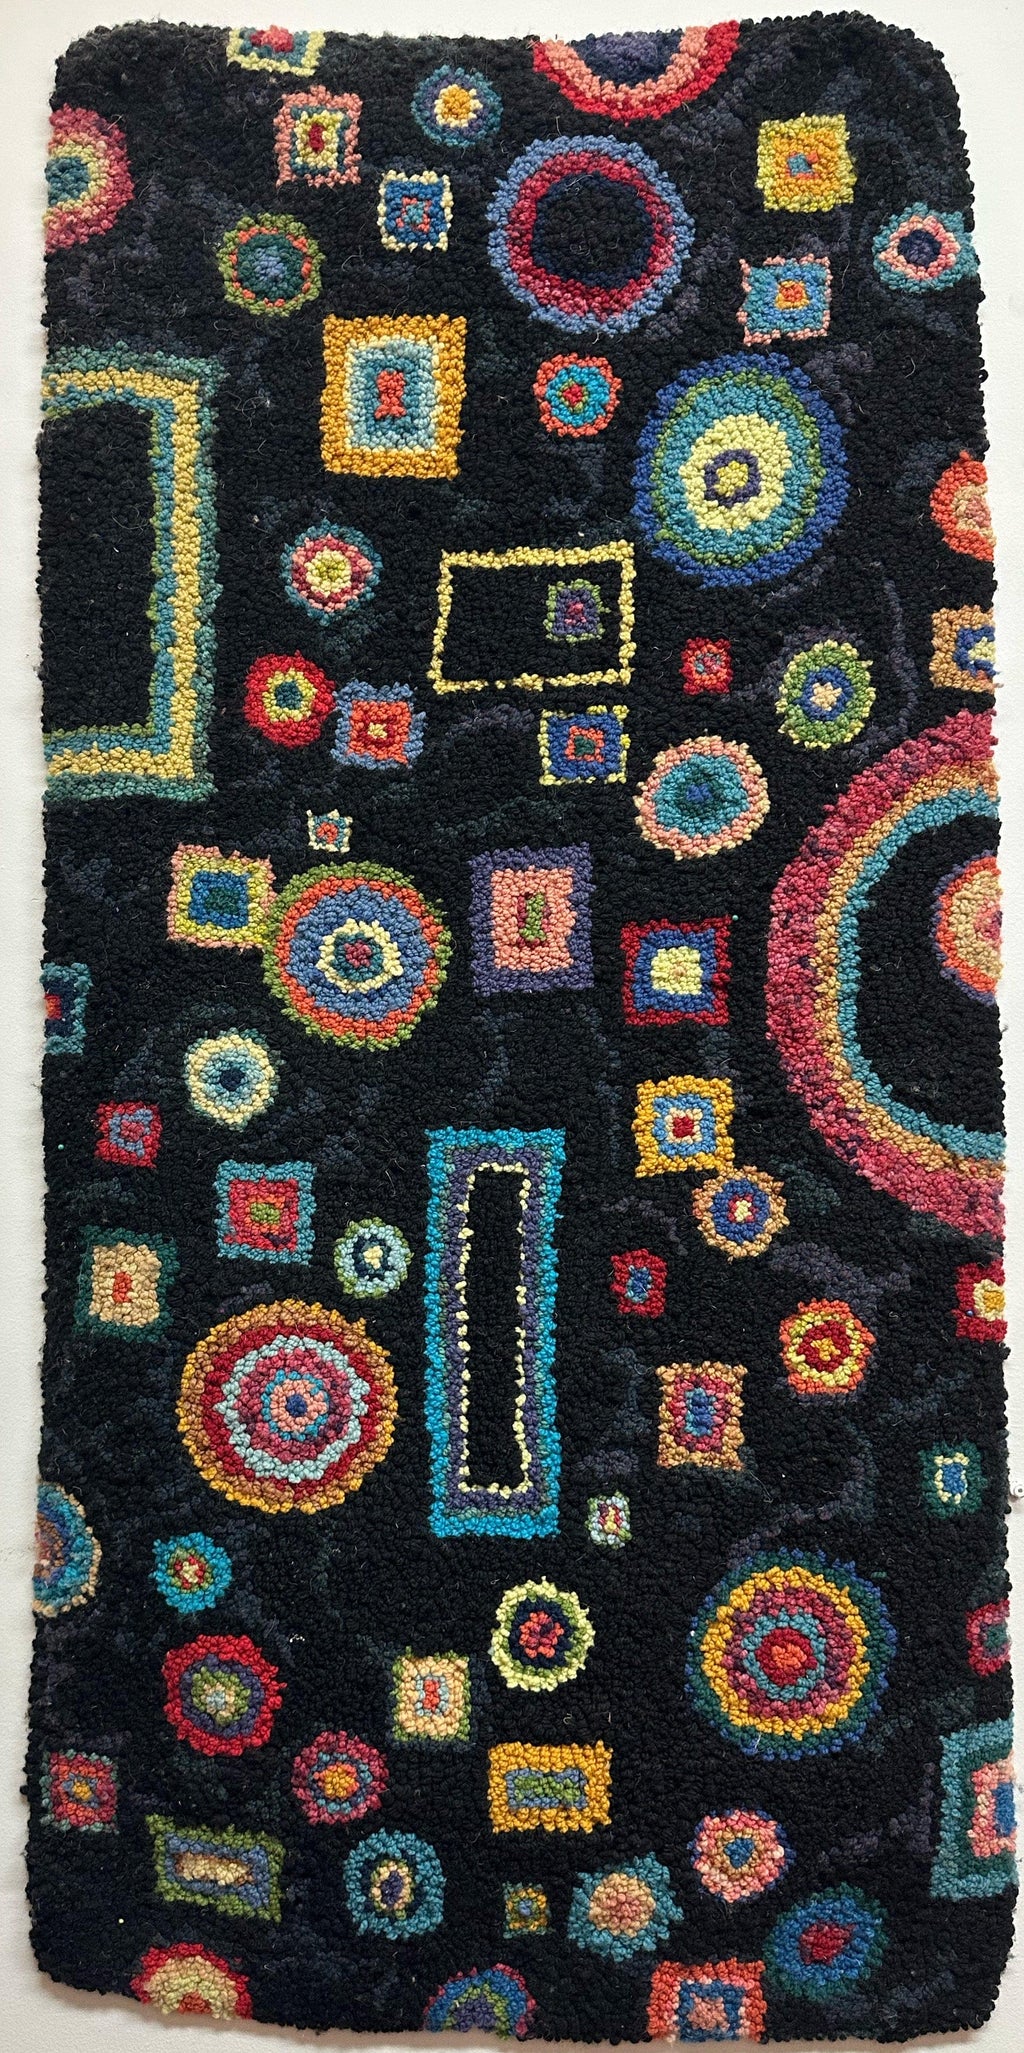 update alt-text with template Eclipse, 52" x 24" Framed-Rugs for sale-Deanne Fitzpatrick Rug Hooking Studio-Rug Hooking Kit -Rug Hooking Pattern -Rug Hooking -Deanne Fitzpatrick Rug Hooking Studio -Is rug hooking the same as punch needle?